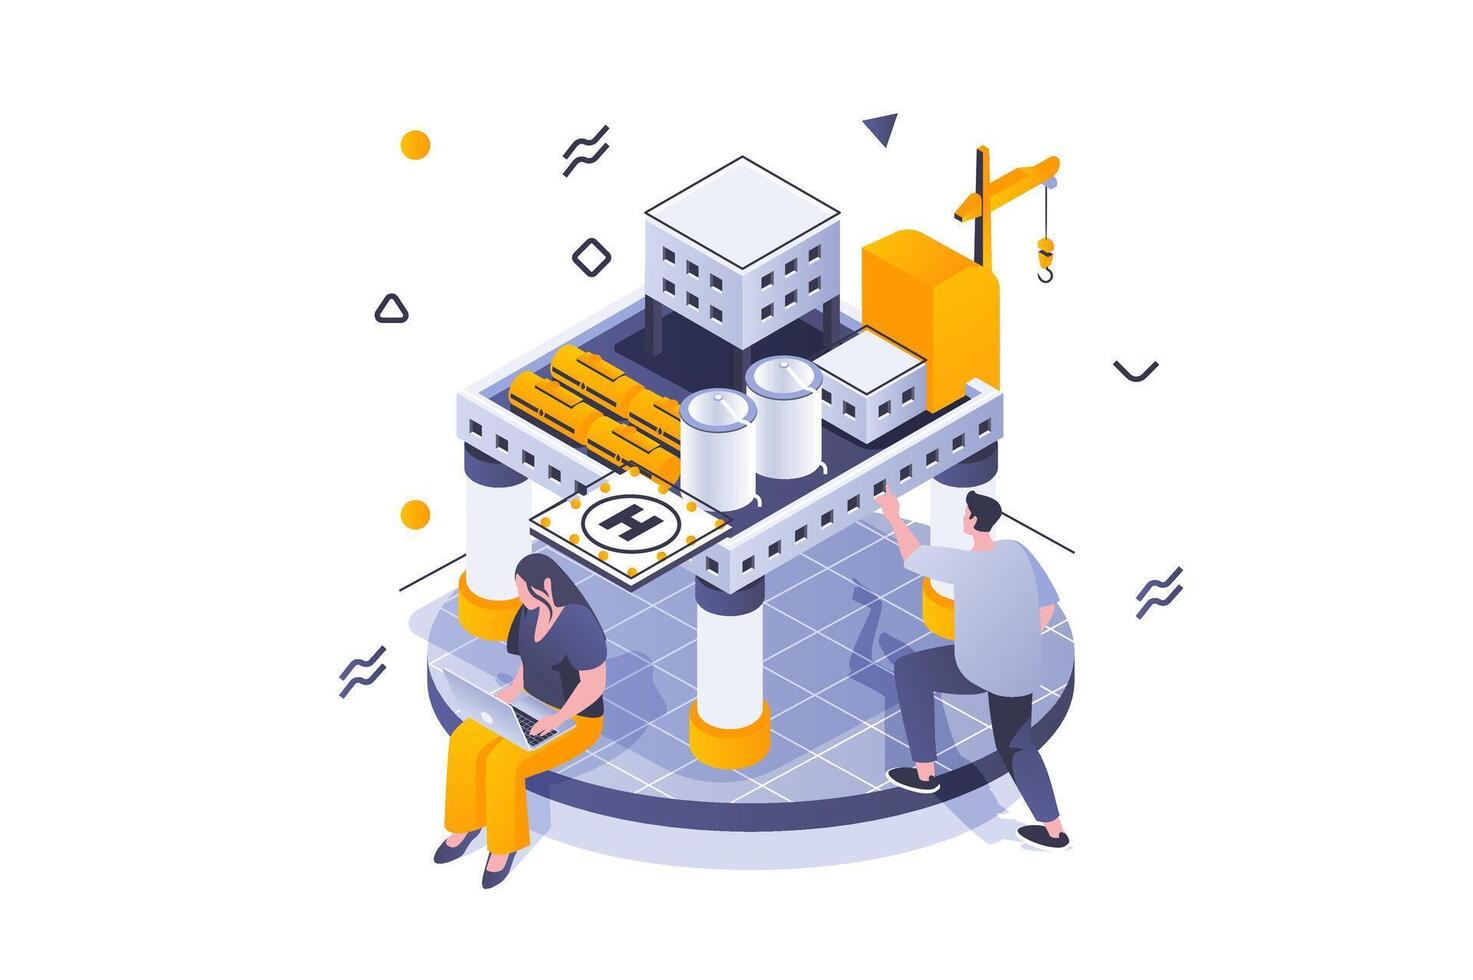 Oil Industry concept in 3d isometric design. Engineers work at industrial plant station with machinery for production and fuel storage. Vector illustration with isometric people scene for web graphic